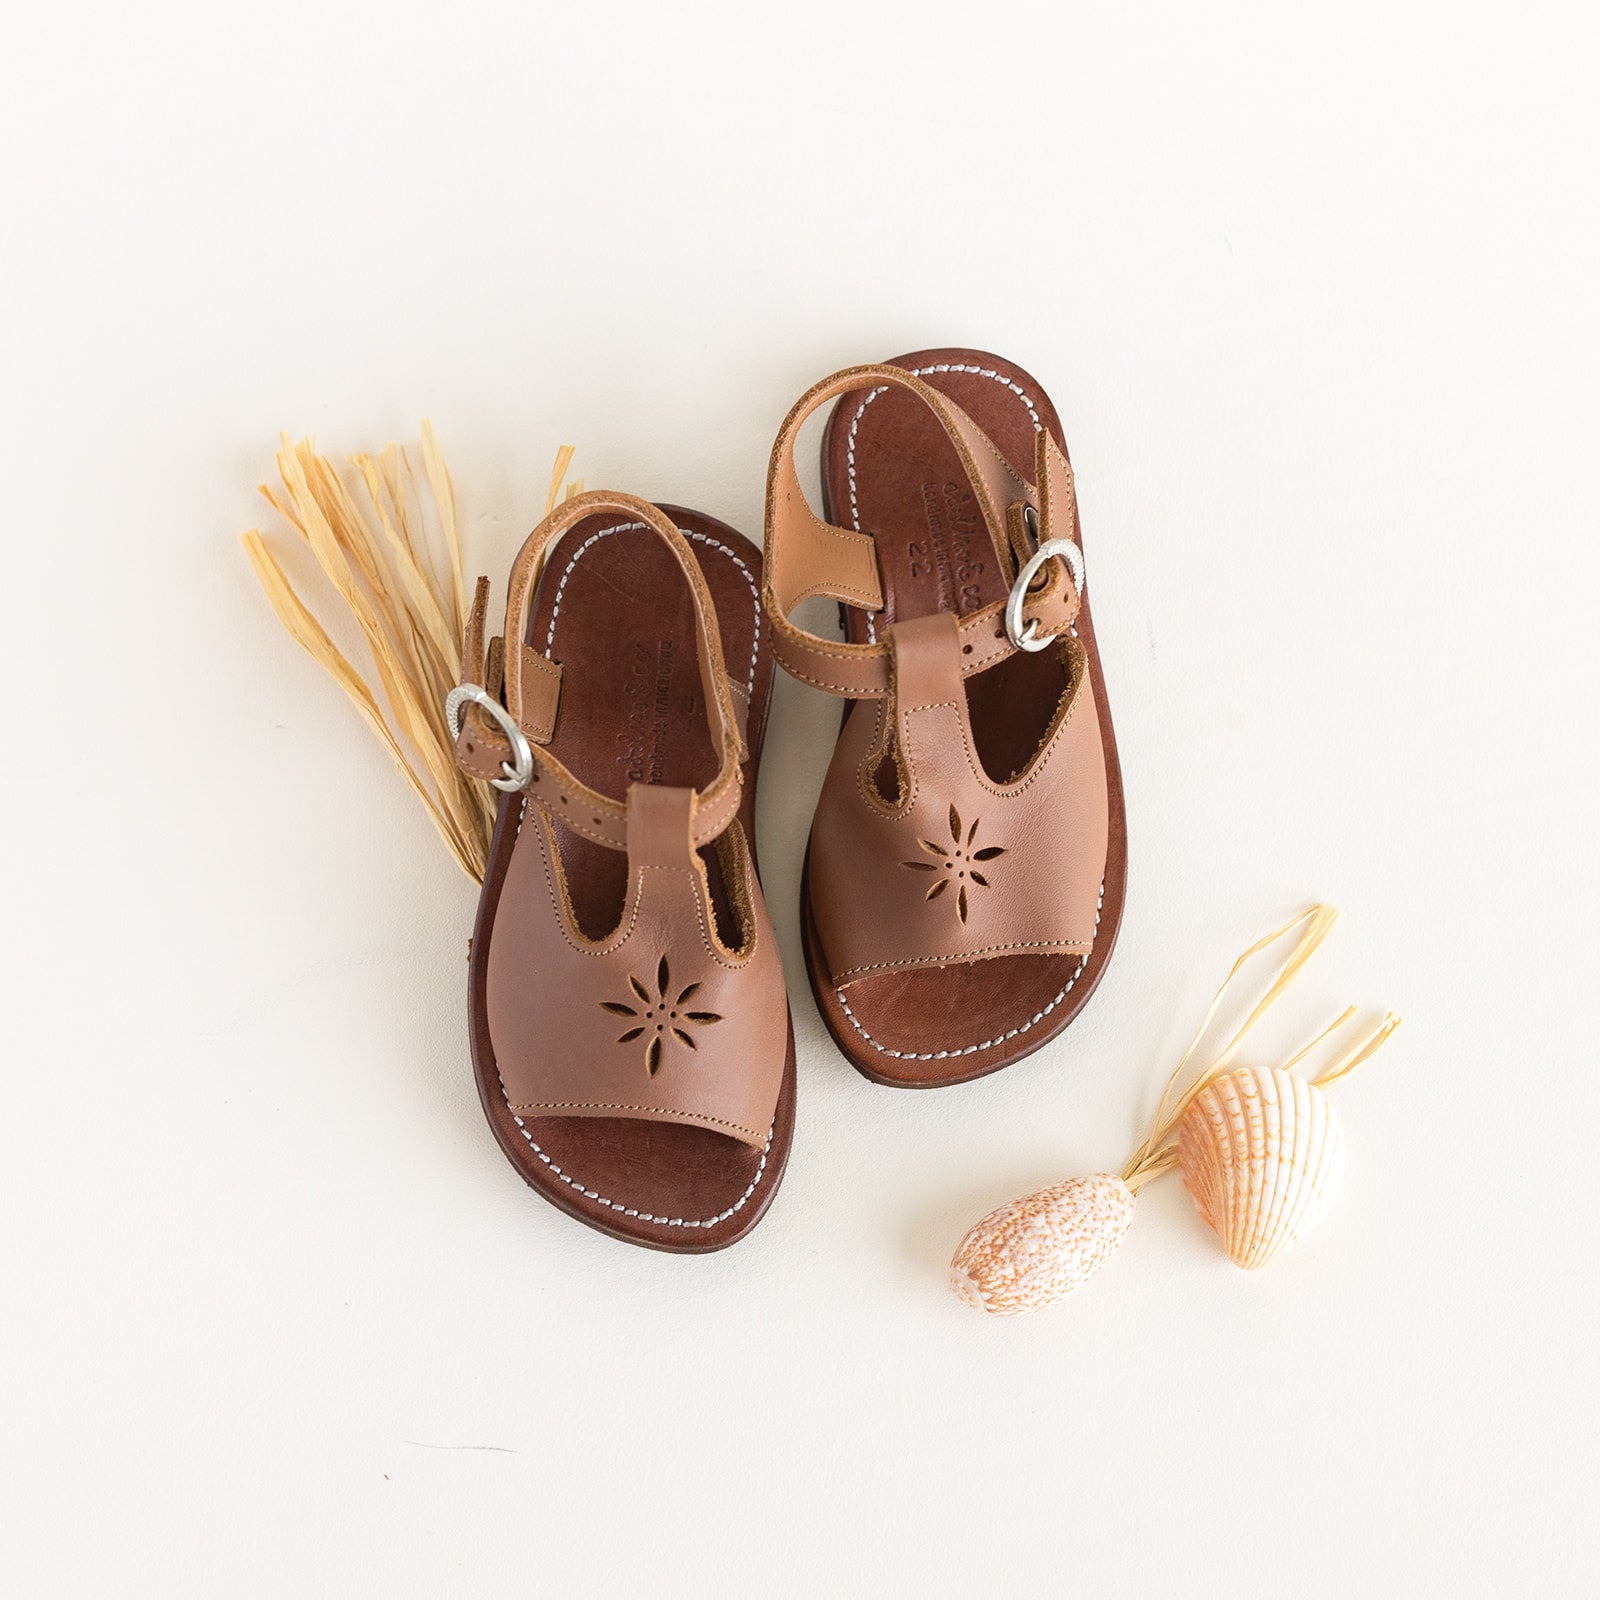 Adelisa & Co T-bar leather sandals for girls with floral detailing.